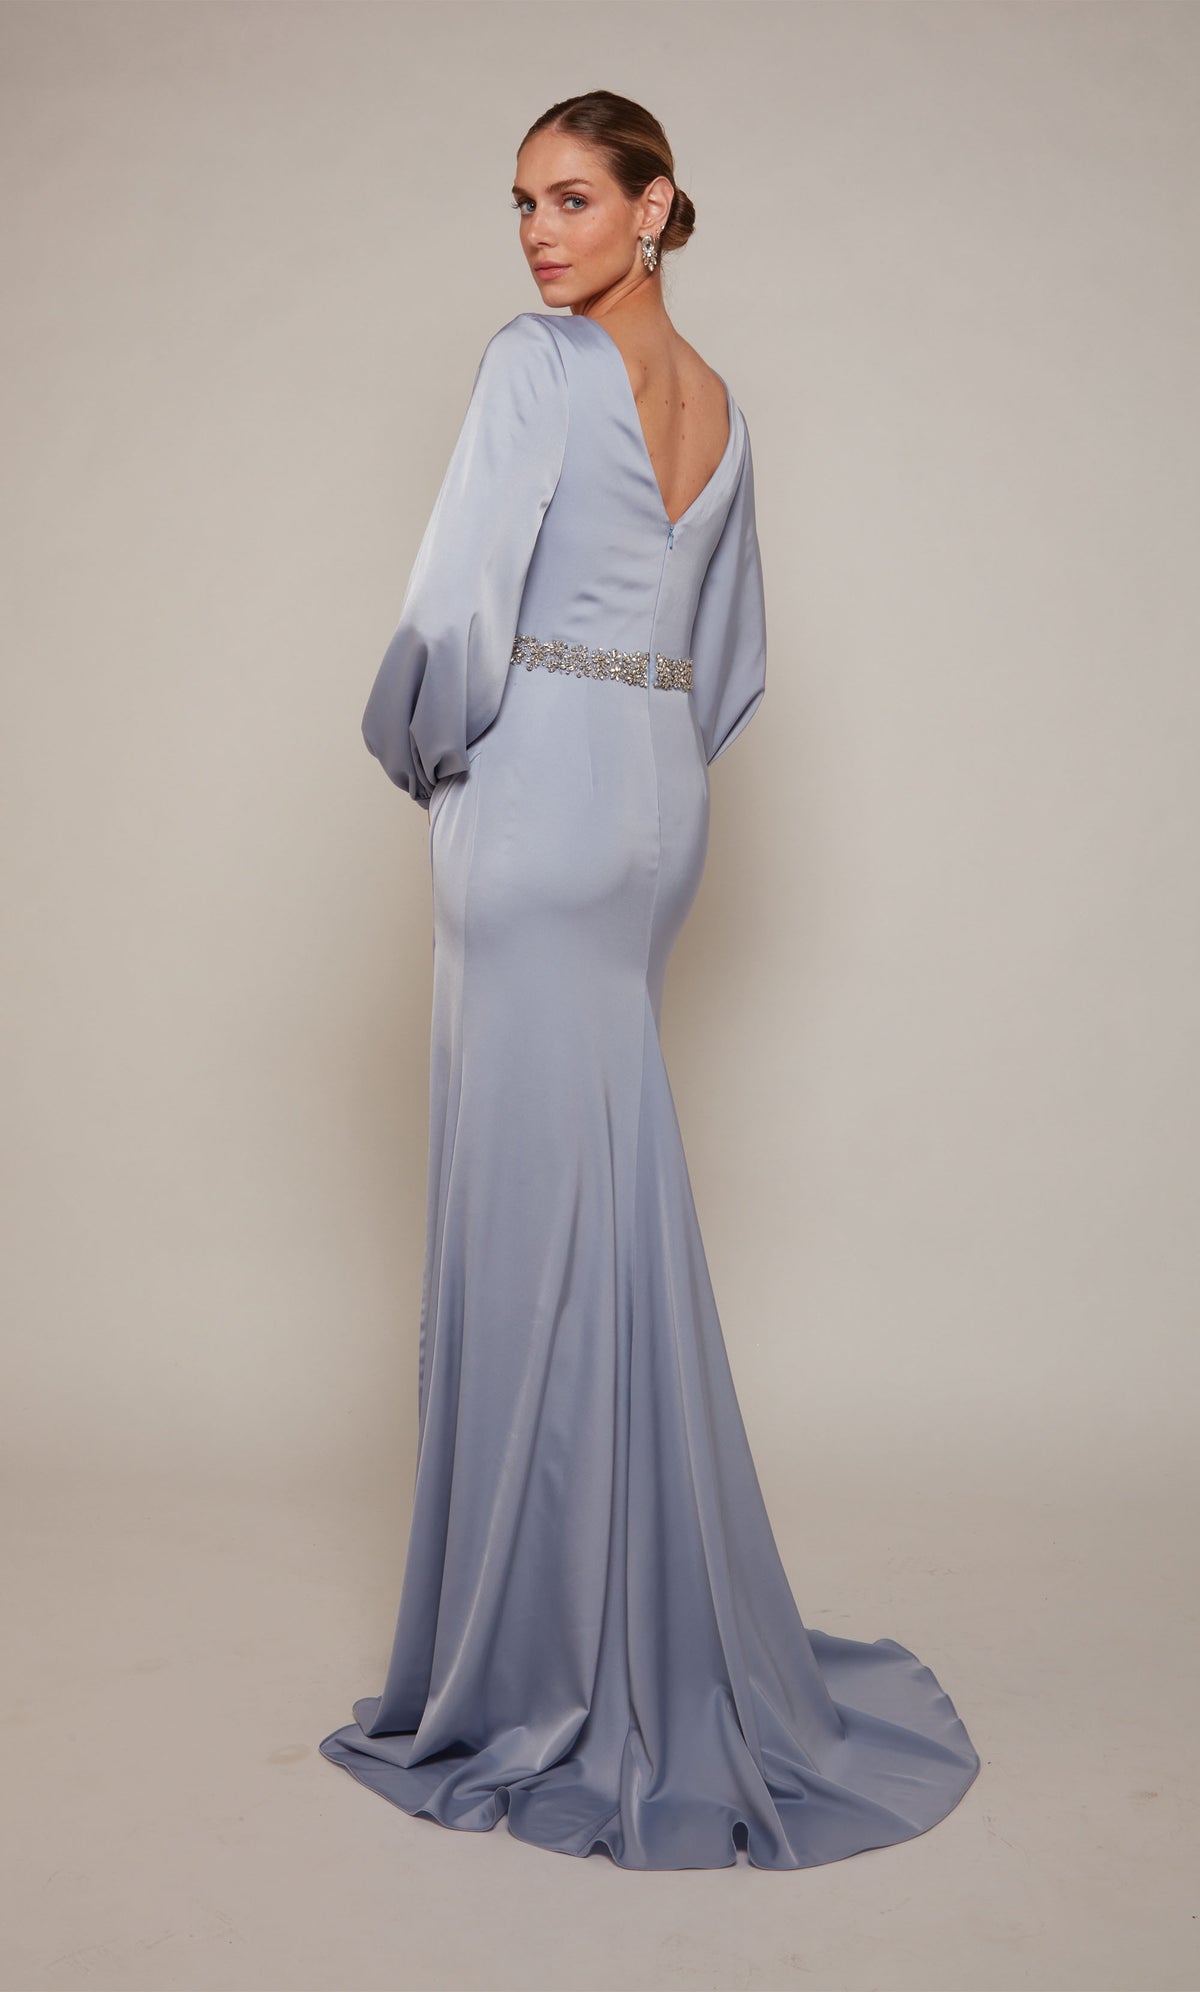 A chic, long sleeve, satin mother of the bride dress with a V-shaped back, jeweled waistline, and train in french blue.